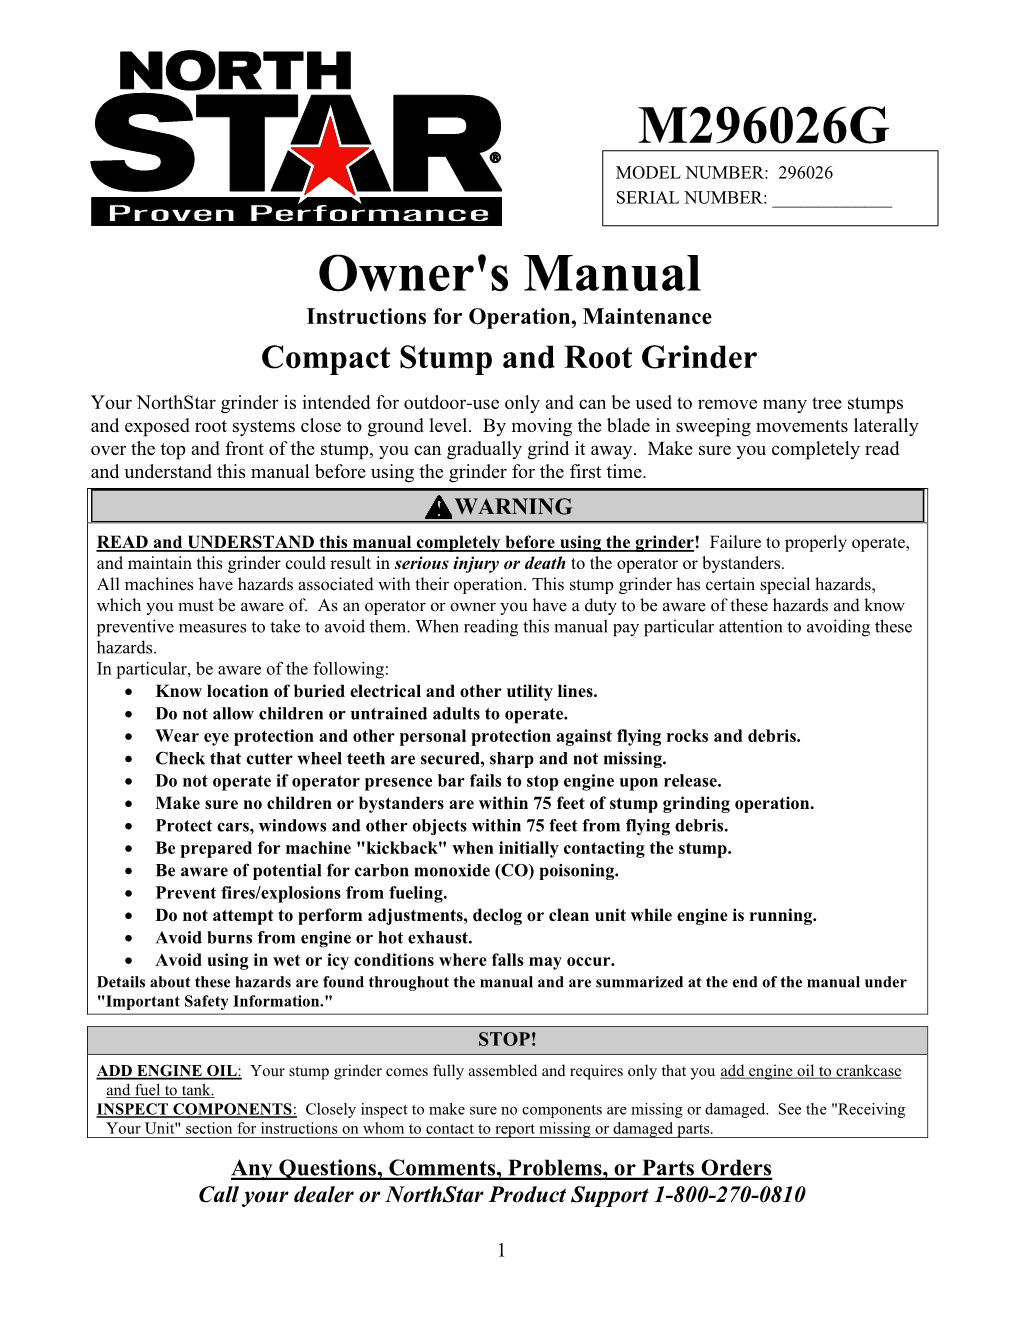 Product Manual for Northstar Compact Stump Grinder